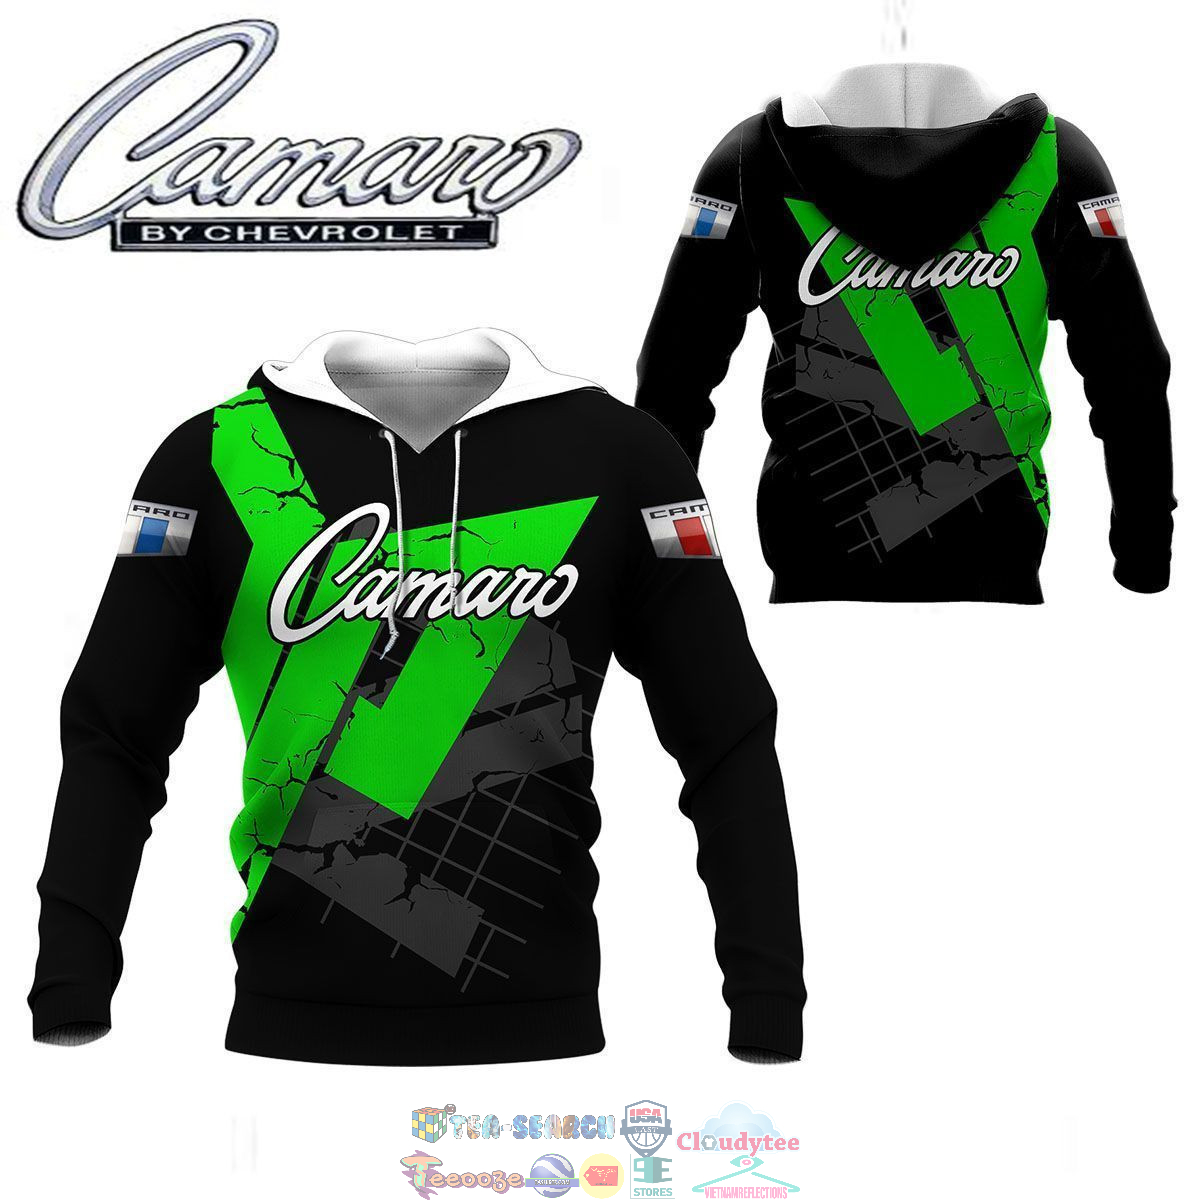 Chevrolet Camaro ver 7 3D hoodie and t-shirt